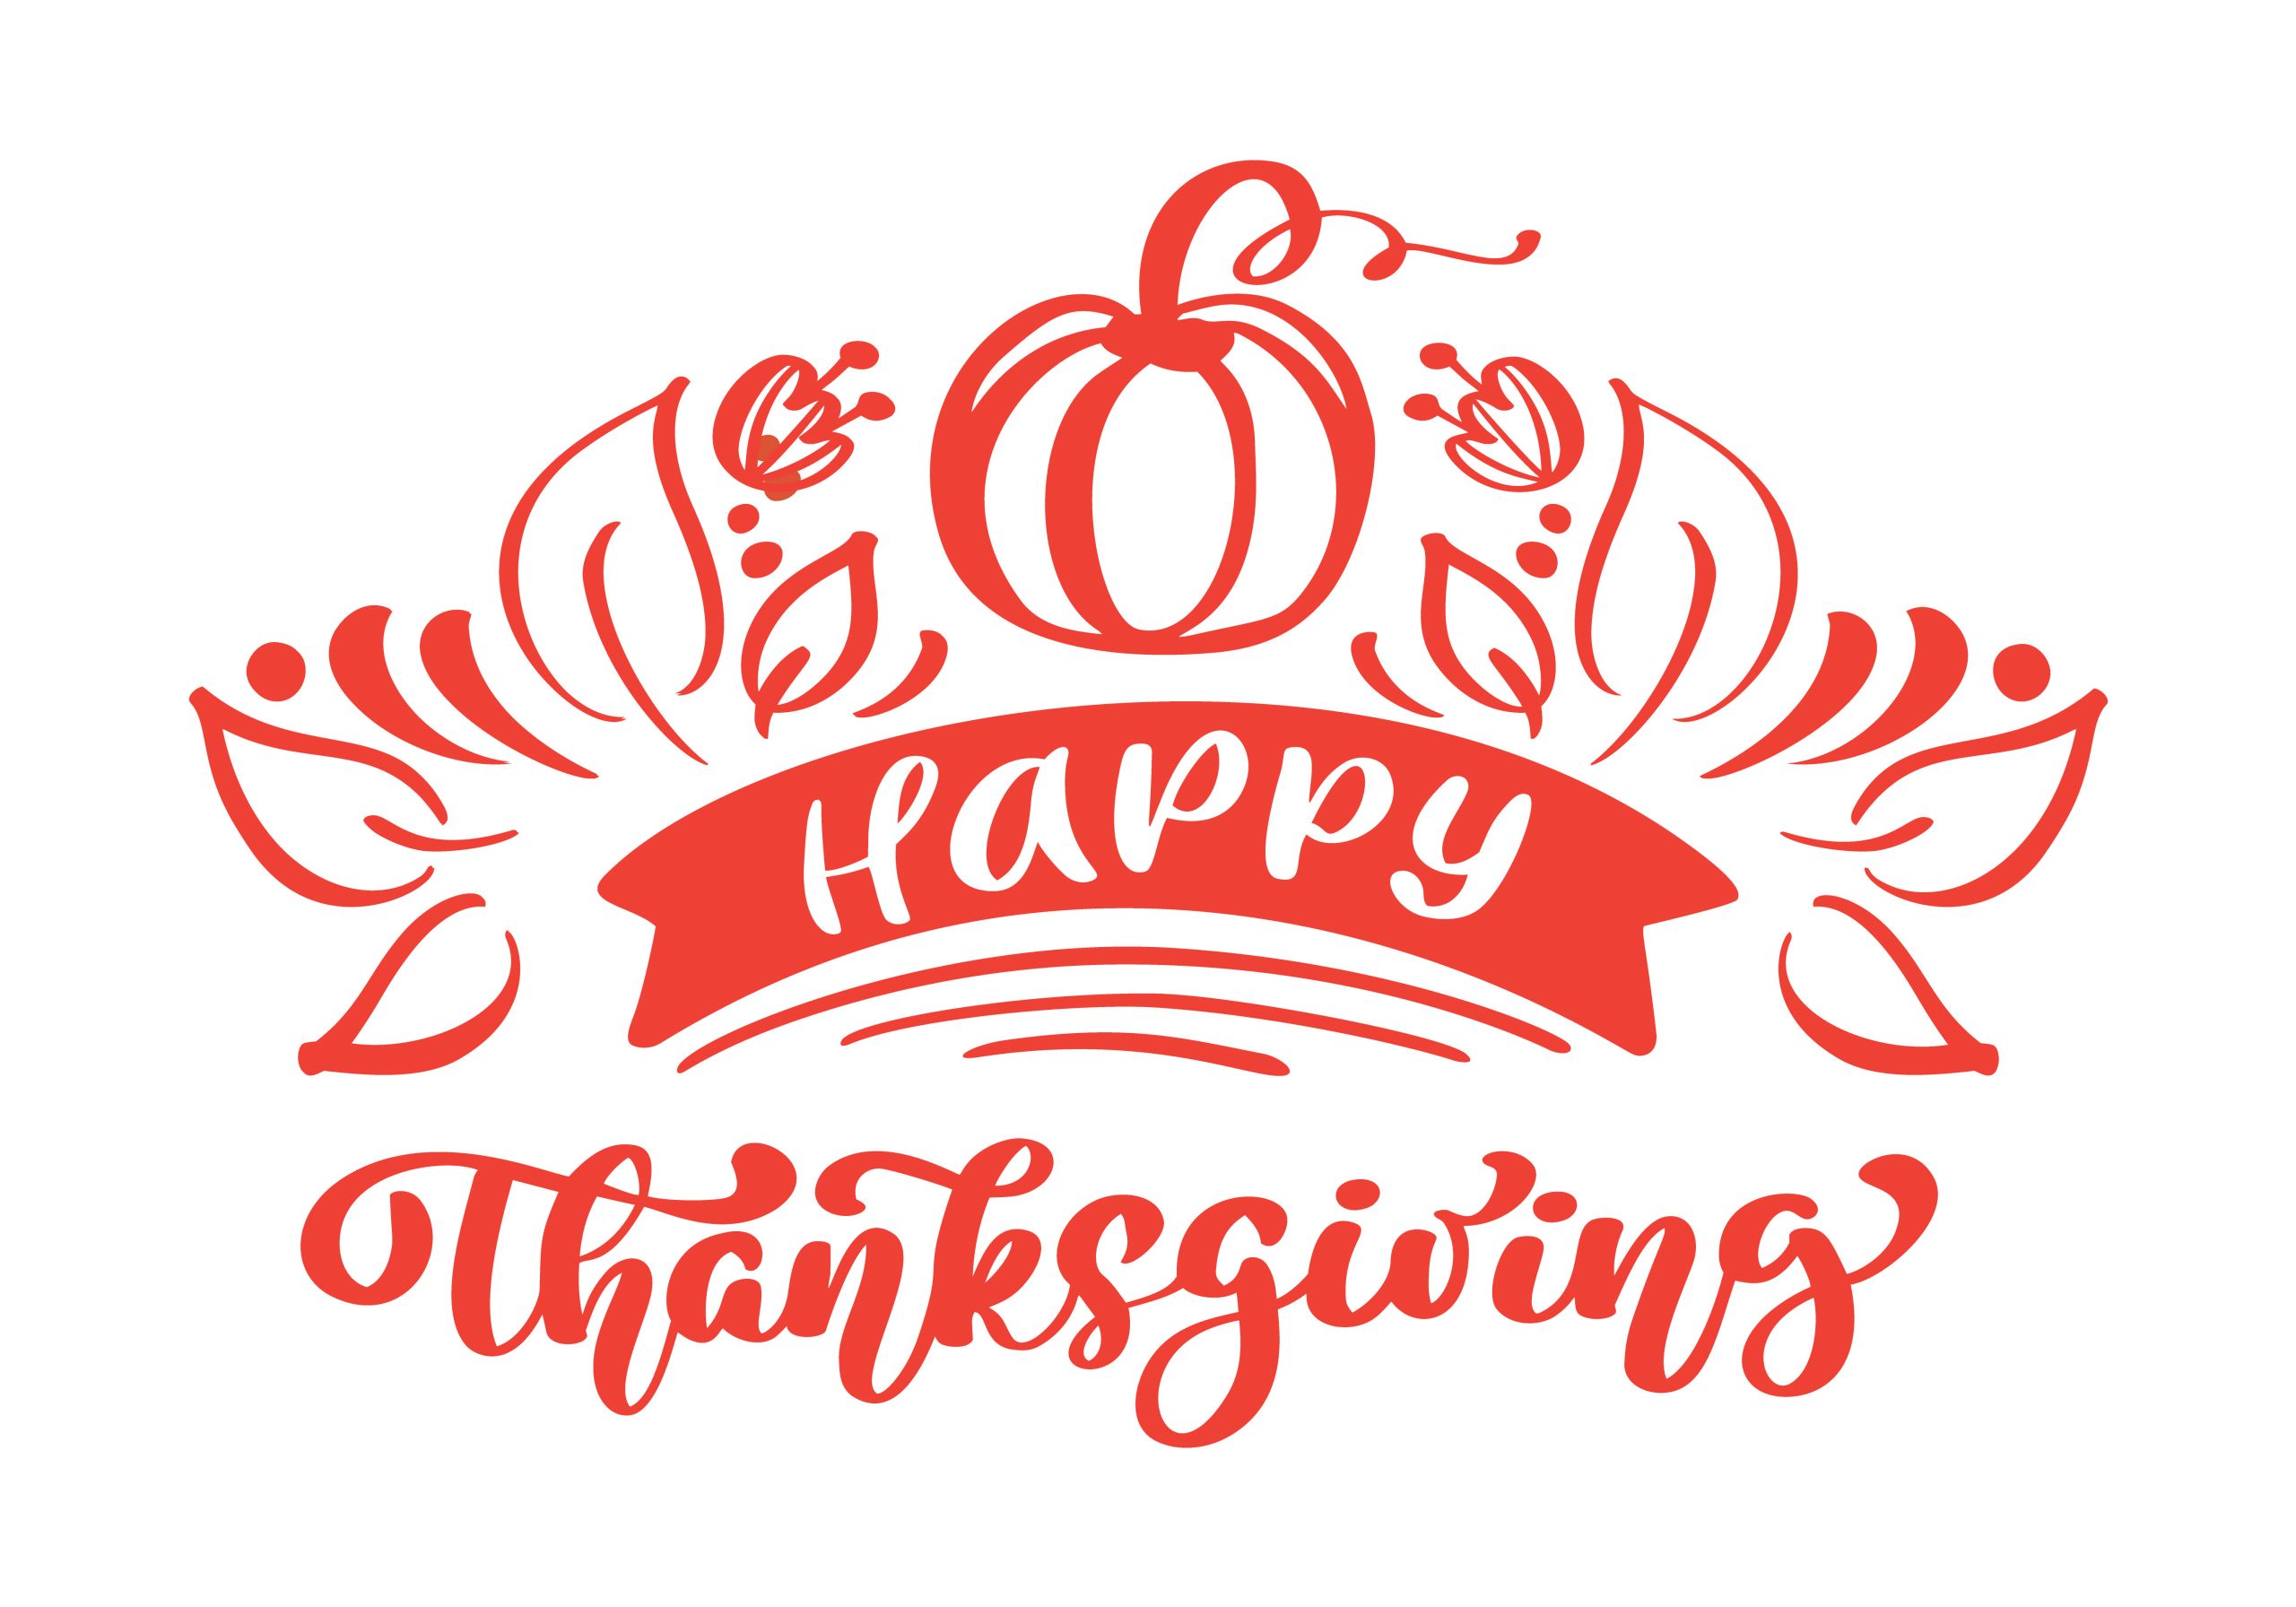 Thanksgiving Quotes Calligraphy
 Happy Thanksgiving Calligraphy Text with pumpkin and